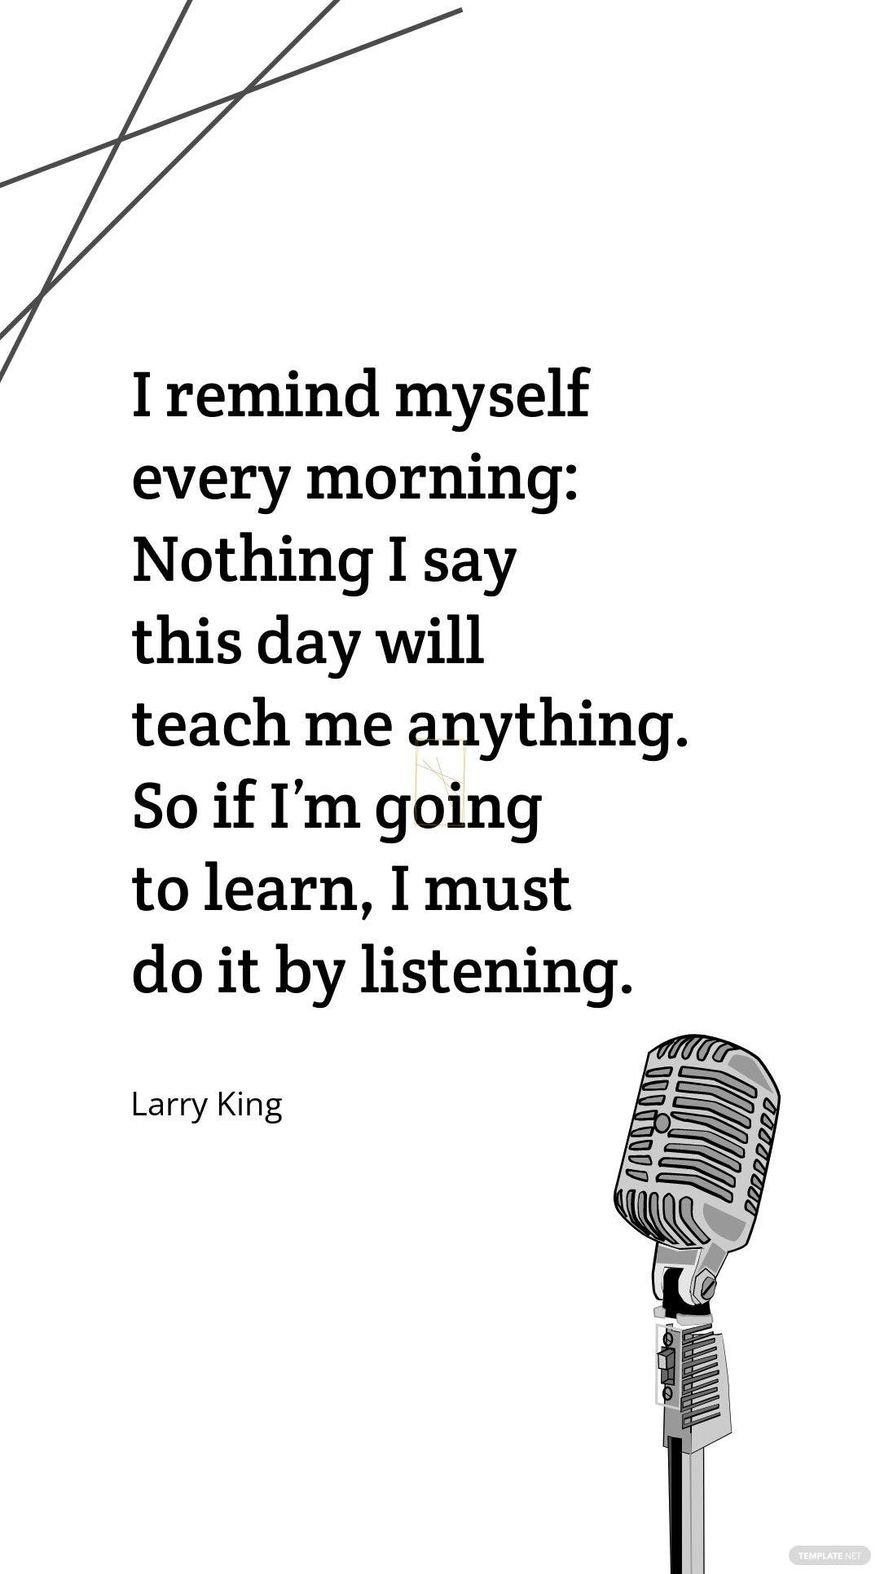 Larry King - I remind myself every morning: Nothing I say this day will teach me anything. So if I’m going to learn, I must do it by listening.